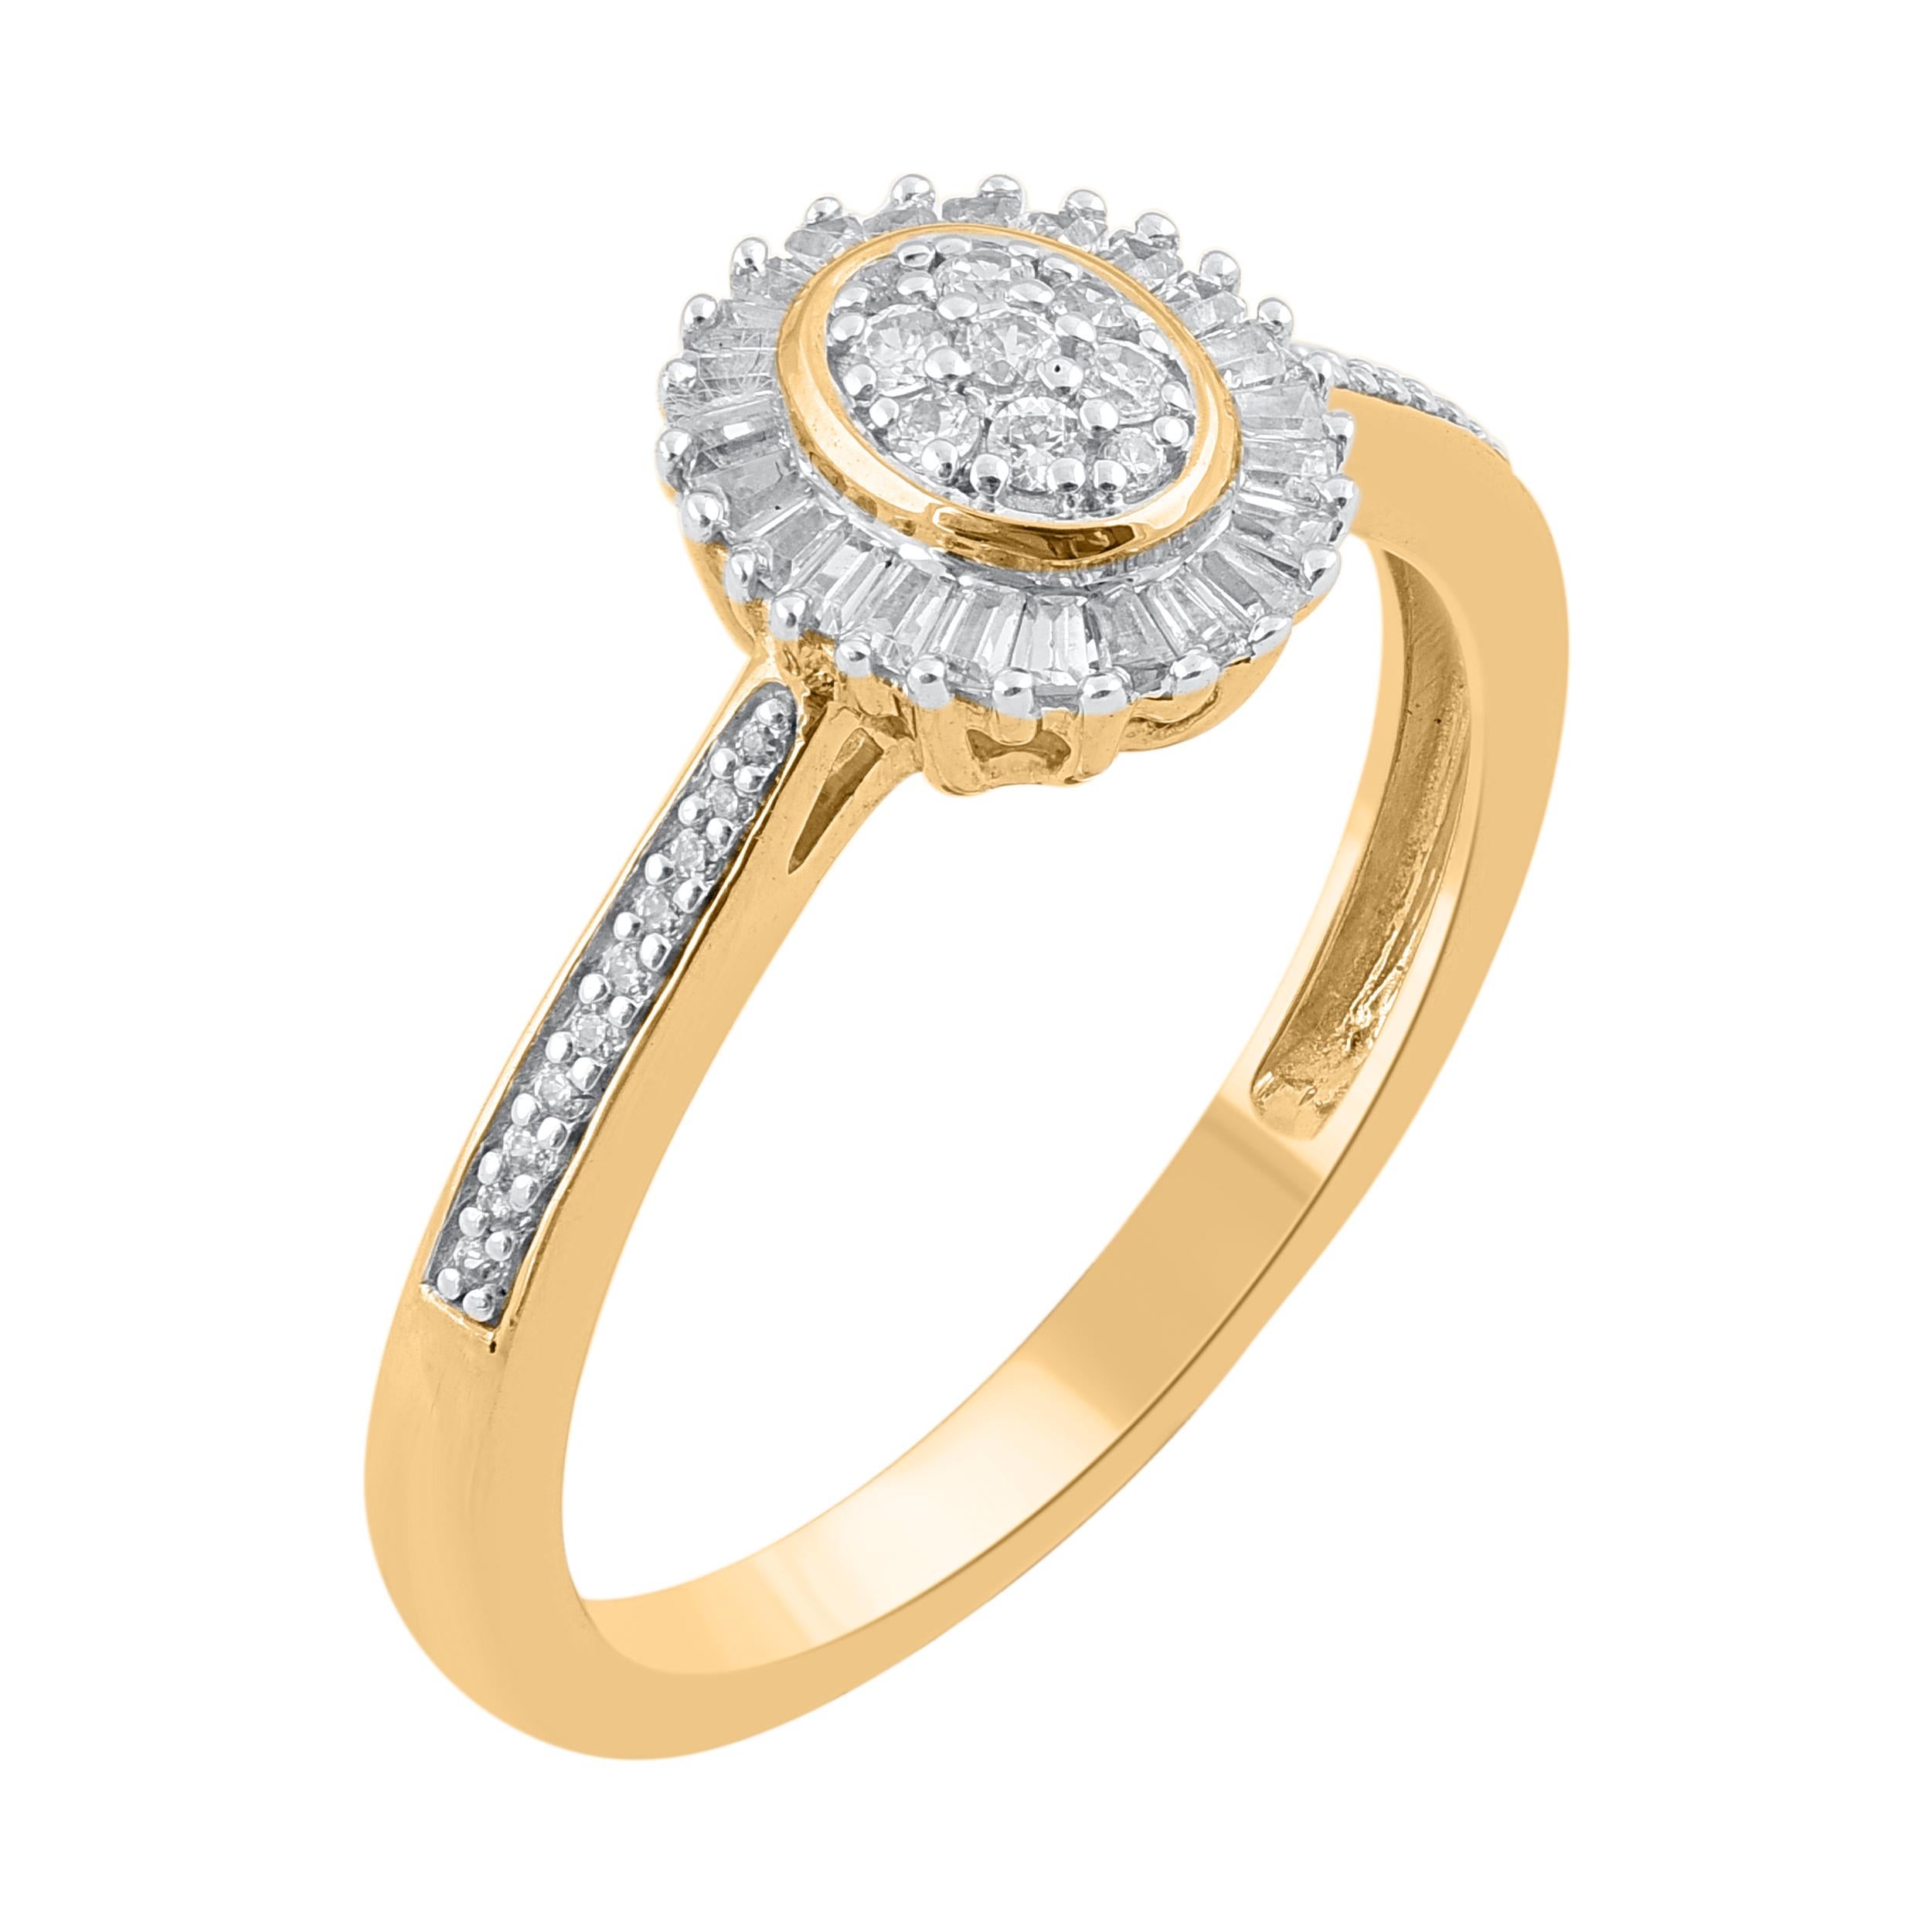 Add a touch of elegance with this diamond engagement ring. This ring is beautifully crafted in 18 karat yellow gold and set with 53 single cut, brilliant cut & baguette diamond in pave & channel setting. The total weight of diamonds is 0.25 carat,